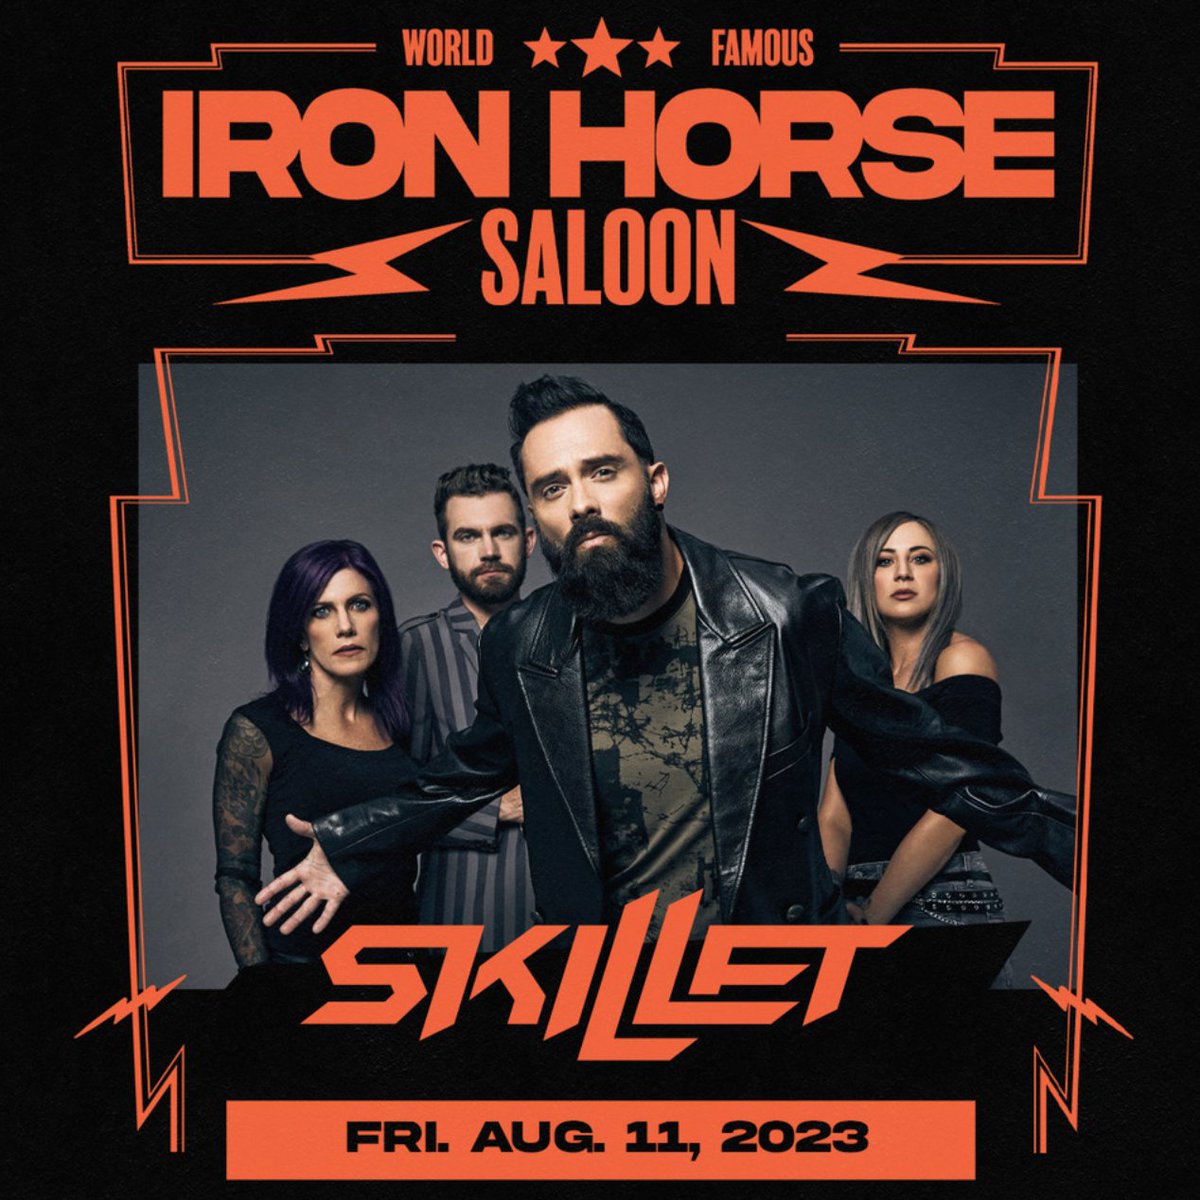 Come rock with us at Iron Horse Saloon August 11th! VIP upgrades available at this link! ihsturgis.com